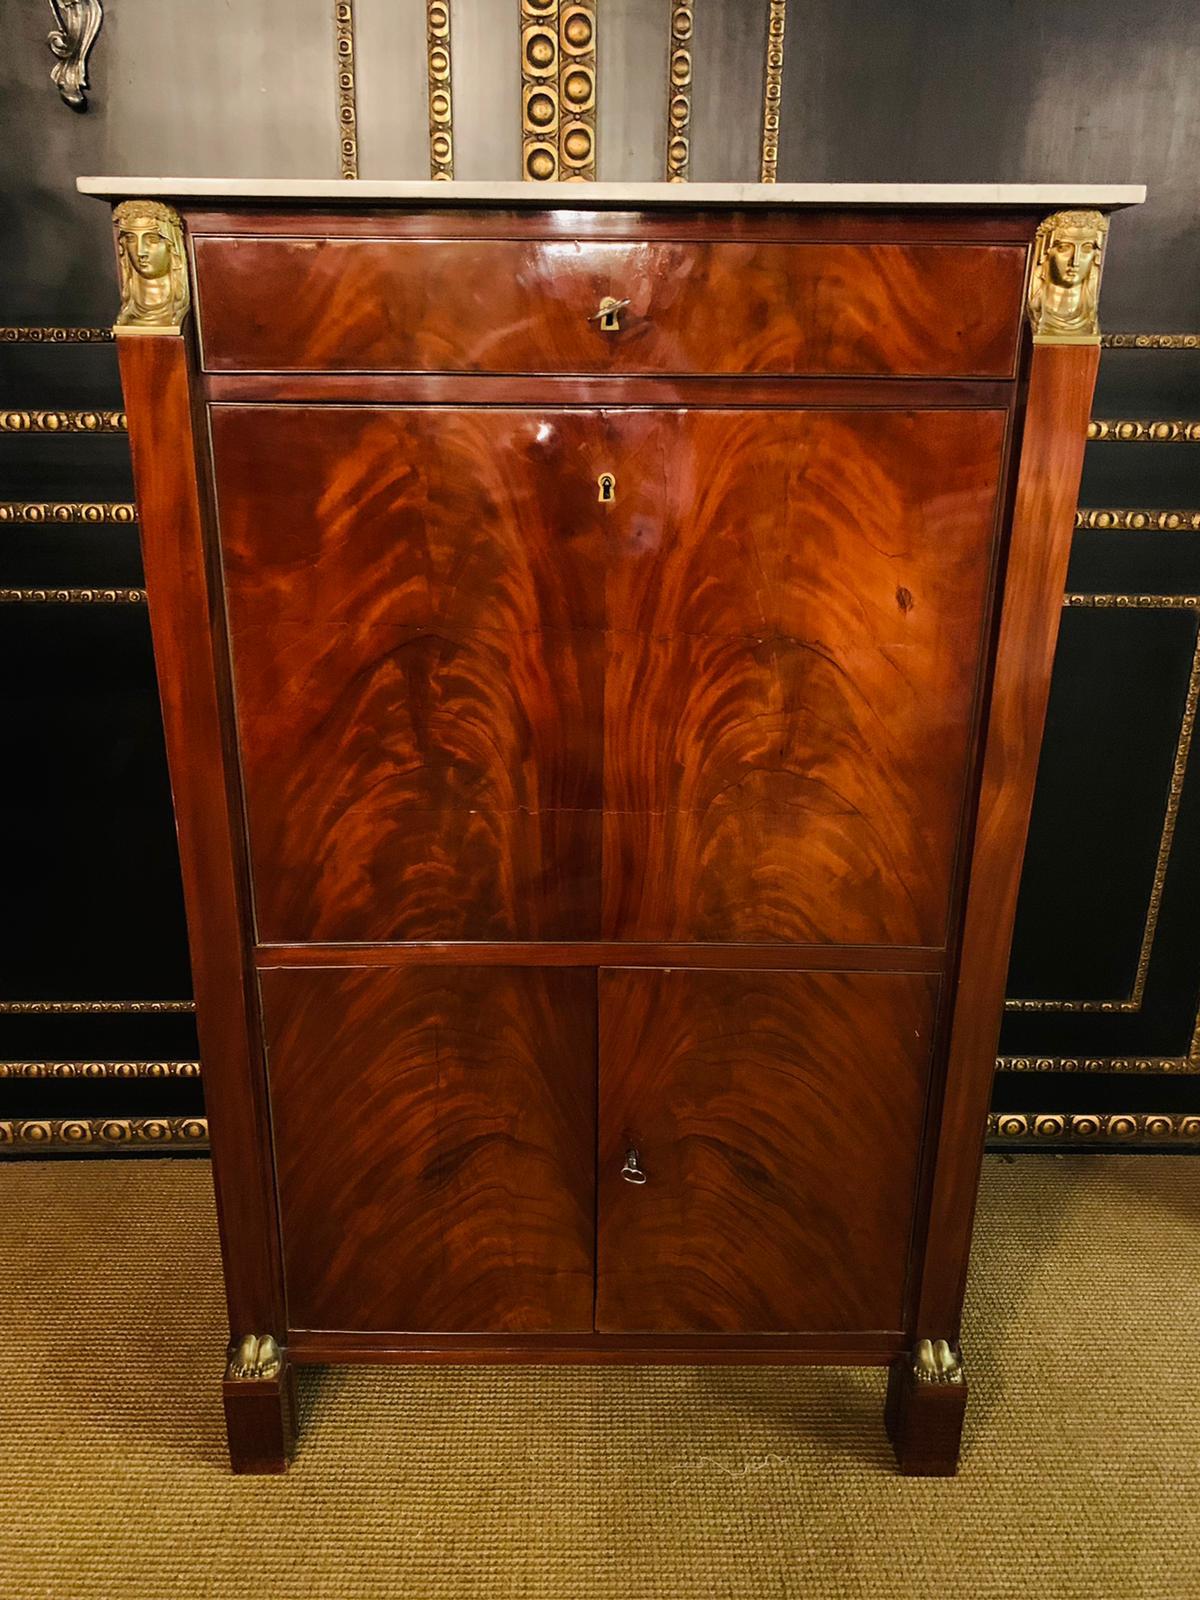 High quality Cuban mahogany on solid oak. gold-plated, finely chased fittings Central lock with a special key.
Architecturally structured front. Rectangular body on 2 high feet with bronze fittings.
Equipped with two doors lockable with a rod.
